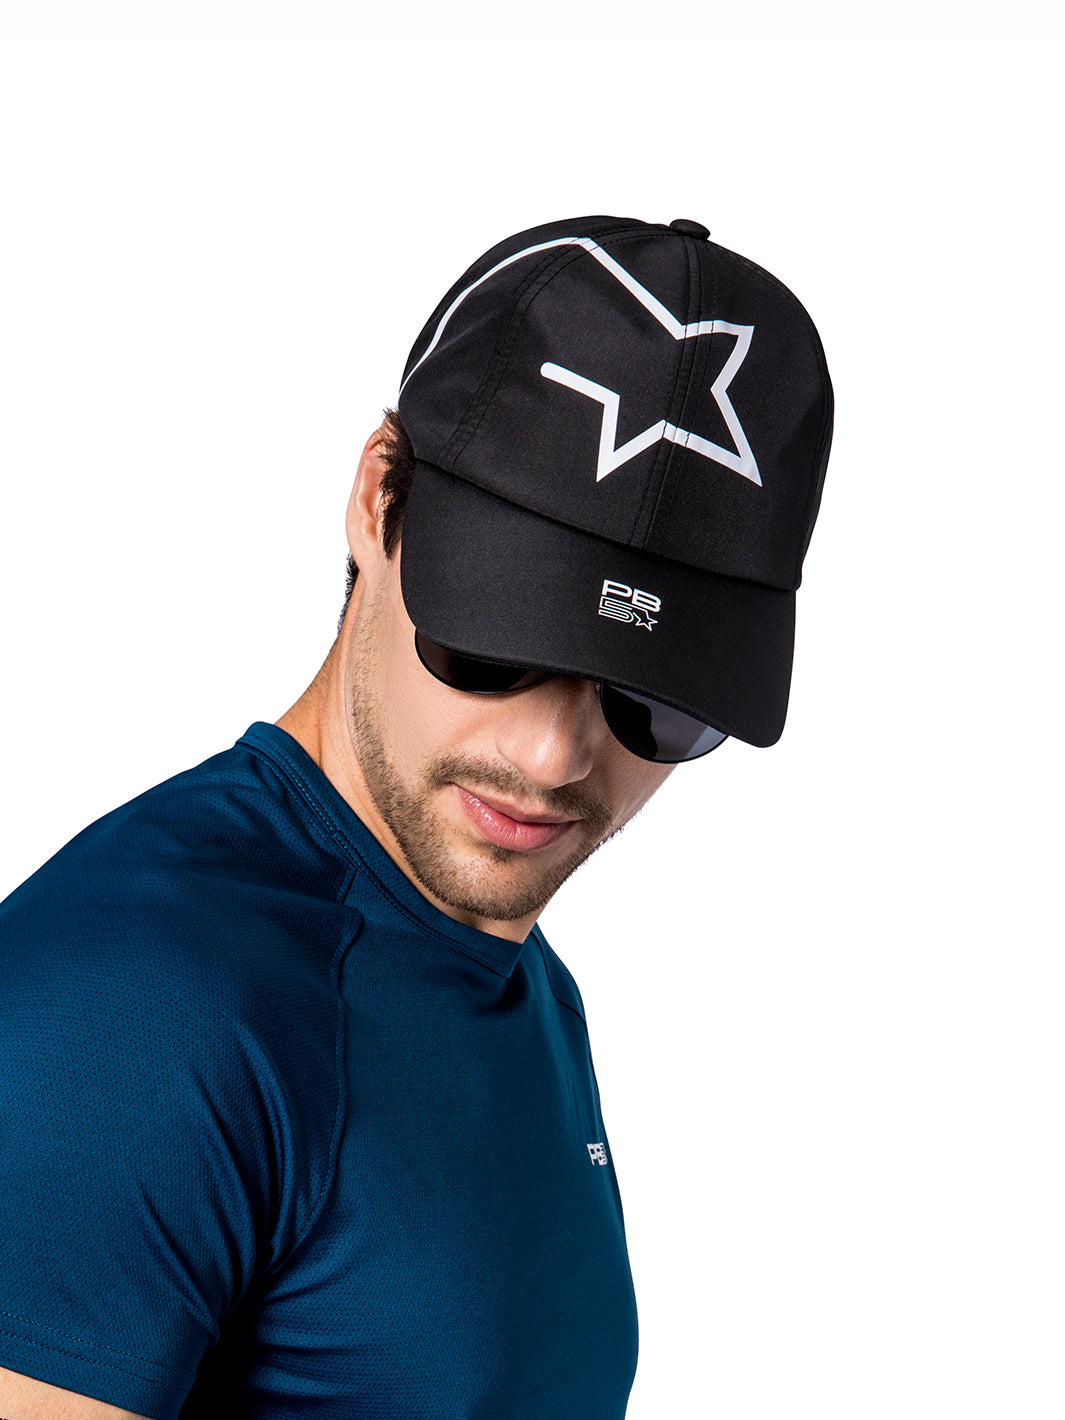 Athlete wearing PB5star's Stellar Cap in black with distinctive white star logo, a trendy accessory for both sports and casual wear.